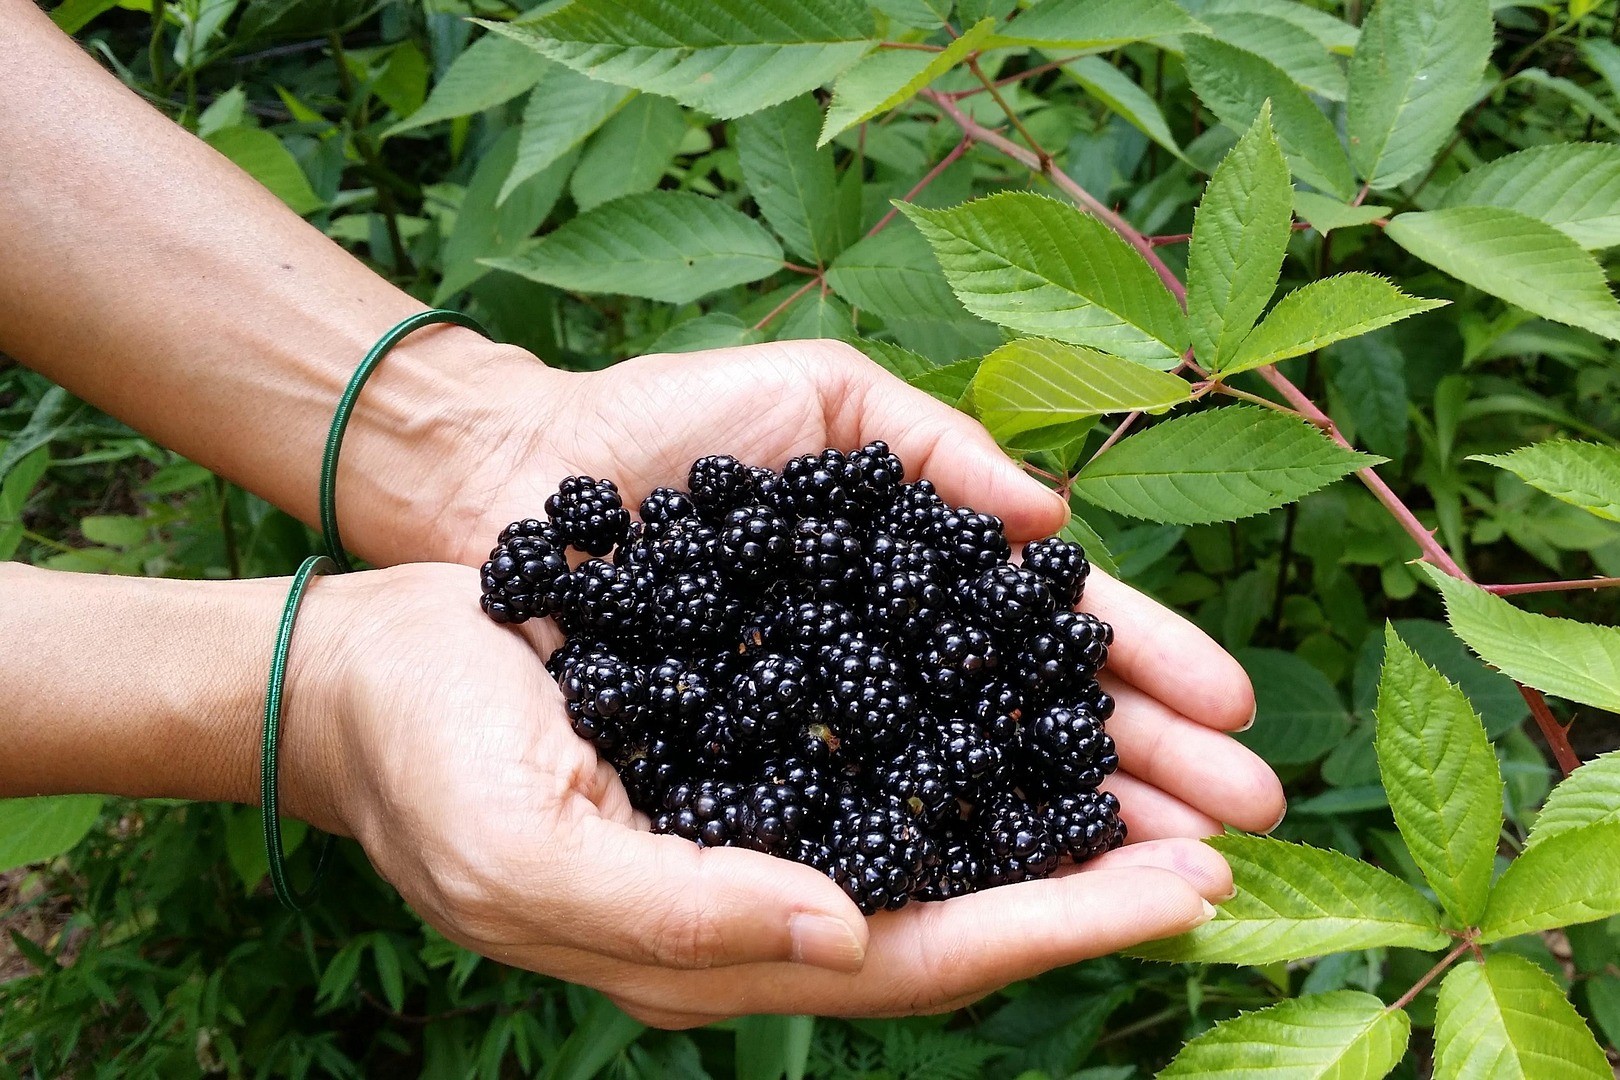 A person holding harvest blackberries.